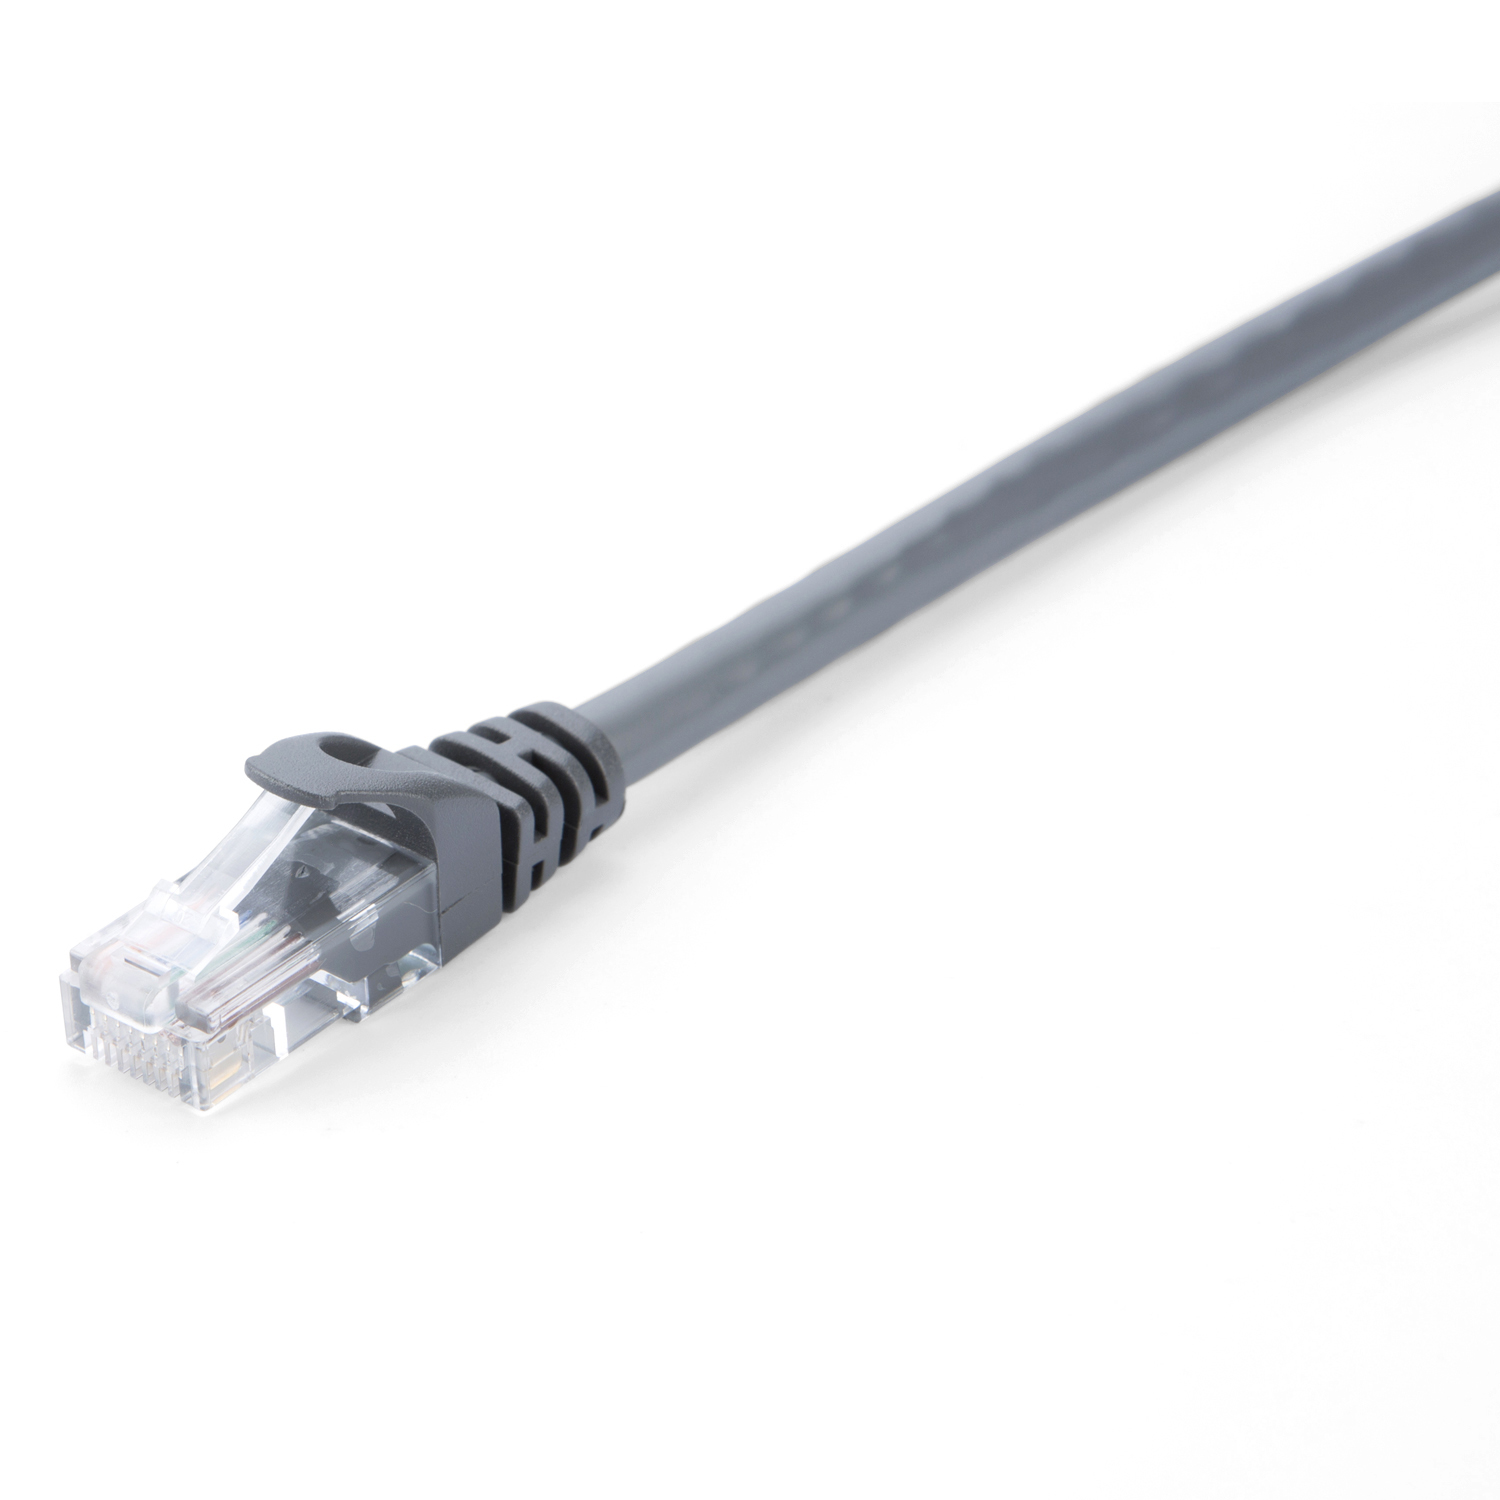 Photos - Cable (video, audio, USB) V7 Grey Cat6 Unshielded  Cable RJ45 Male to RJ45 Male 3m 10ft V7CAT6U (UTP)